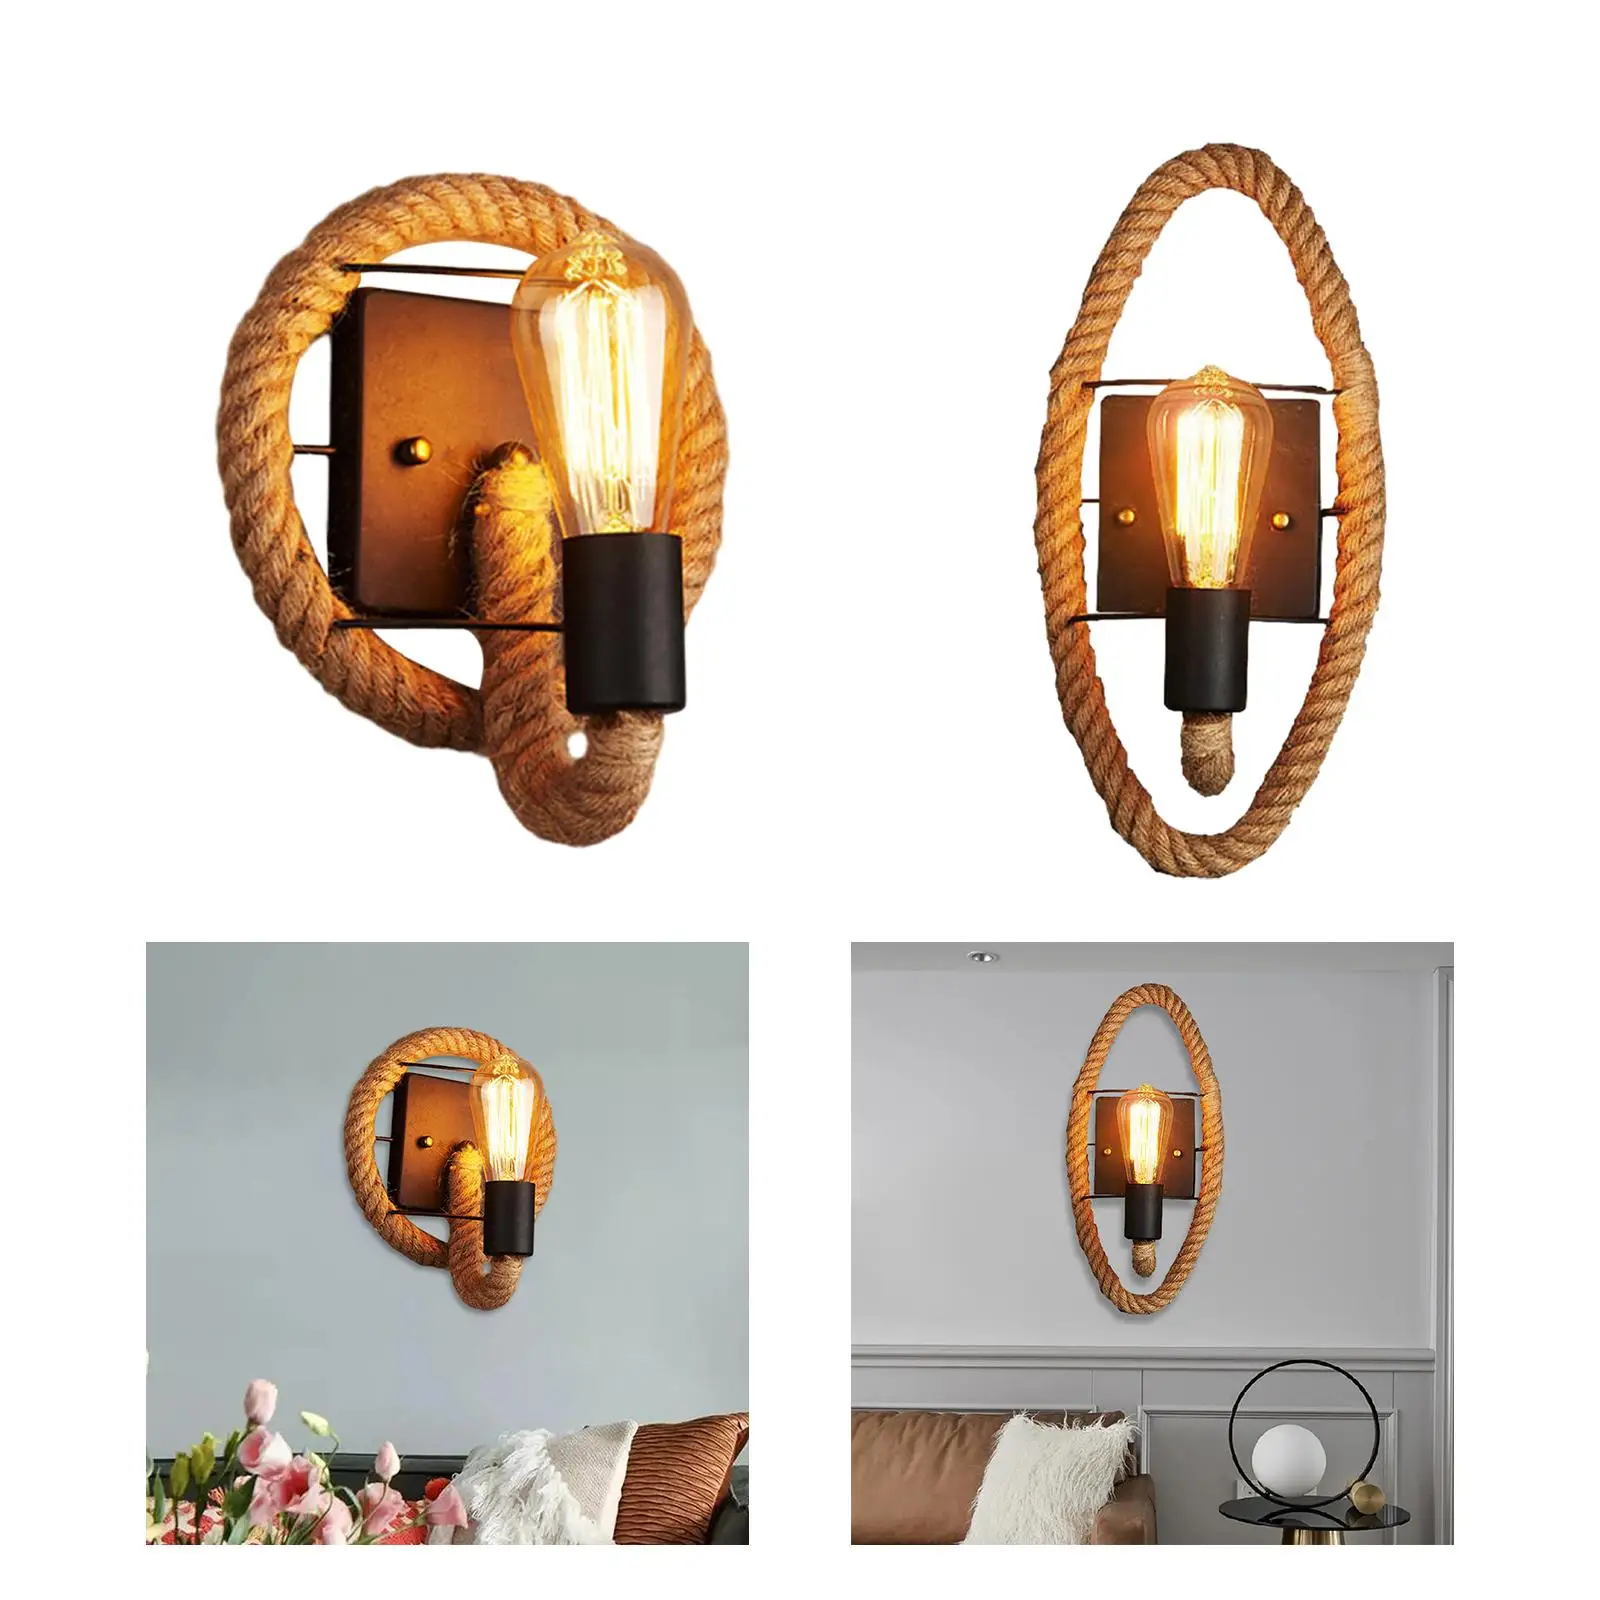 Industrial Wall Sconce Decoration Vintage Style Antique Wall Lighting Hemp Rope Wall Lamp for Stairway Bar Living Room Club